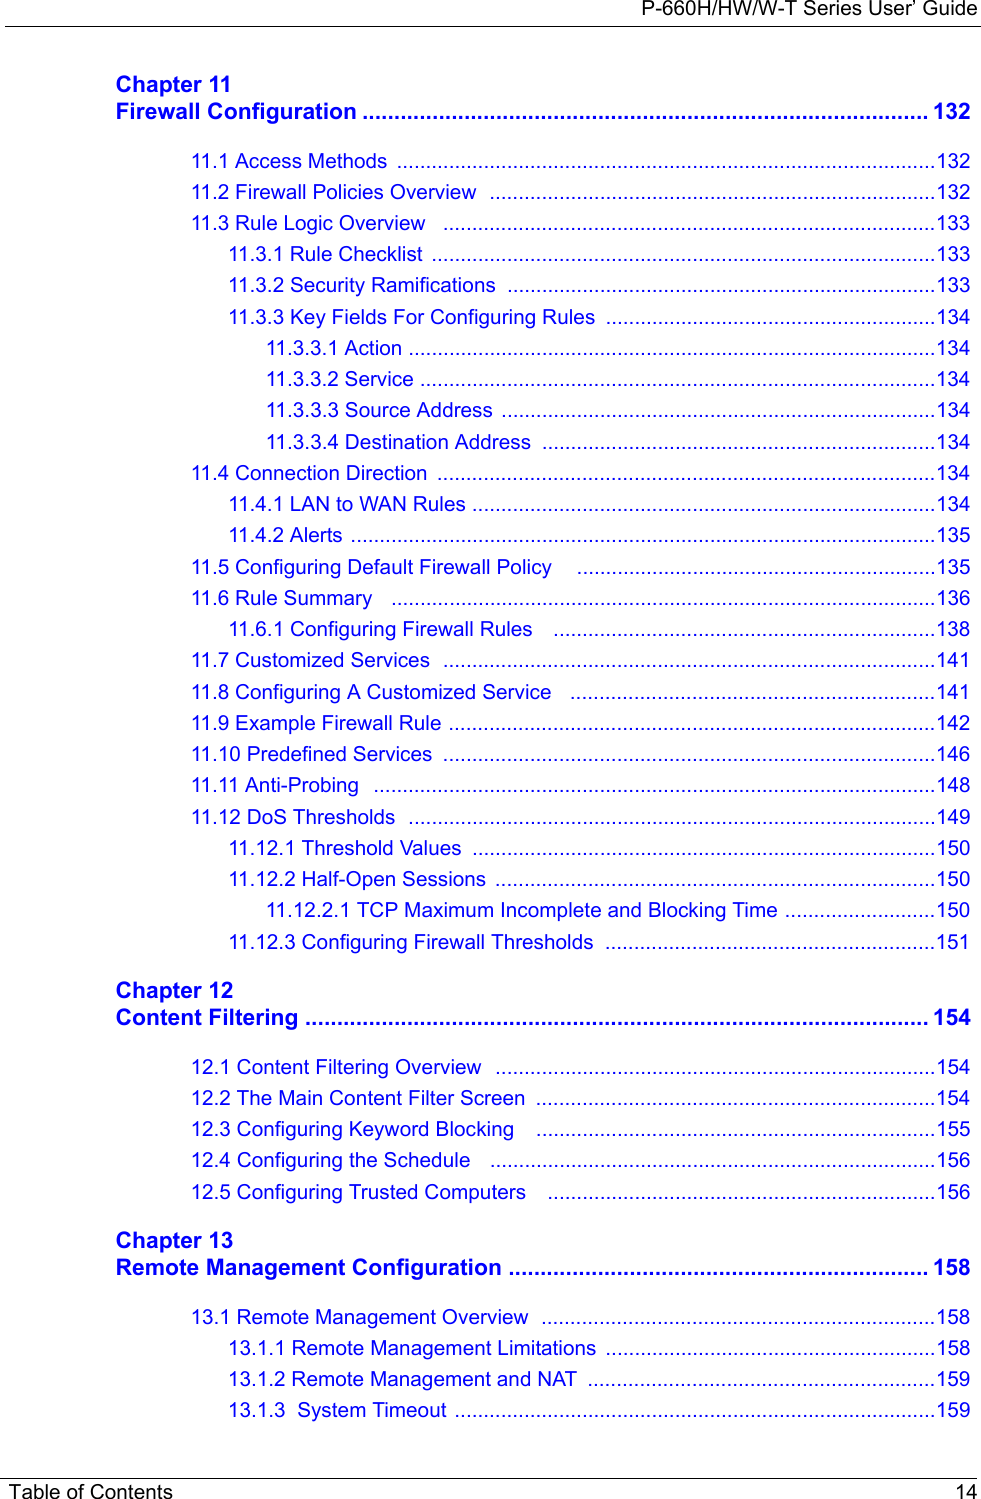 P-660H/HW/W-T Series User’ GuideTable of Contents 14Chapter 11Firewall Configuration ......................................................................................... 13211.1 Access Methods  .............................................................................................13211.2 Firewall Policies Overview  .............................................................................13211.3 Rule Logic Overview   .....................................................................................13311.3.1 Rule Checklist  .......................................................................................13311.3.2 Security Ramifications ..........................................................................13311.3.3 Key Fields For Configuring Rules  .........................................................13411.3.3.1 Action ...........................................................................................13411.3.3.2 Service .........................................................................................13411.3.3.3 Source Address ...........................................................................13411.3.3.4 Destination Address ....................................................................13411.4 Connection Direction  ......................................................................................13411.4.1 LAN to WAN Rules ................................................................................13411.4.2 Alerts .....................................................................................................13511.5 Configuring Default Firewall Policy    ..............................................................13511.6 Rule Summary   ..............................................................................................13611.6.1 Configuring Firewall Rules    ..................................................................13811.7 Customized Services  .....................................................................................14111.8 Configuring A Customized Service   ...............................................................14111.9 Example Firewall Rule ....................................................................................14211.10 Predefined Services  .....................................................................................14611.11 Anti-Probing   .................................................................................................14811.12 DoS Thresholds  ...........................................................................................14911.12.1 Threshold Values  ................................................................................15011.12.2 Half-Open Sessions  ............................................................................15011.12.2.1 TCP Maximum Incomplete and Blocking Time ..........................15011.12.3 Configuring Firewall Thresholds  .........................................................151Chapter 12Content Filtering .................................................................................................. 15412.1 Content Filtering Overview  ............................................................................15412.2 The Main Content Filter Screen  .....................................................................15412.3 Configuring Keyword Blocking    .....................................................................15512.4 Configuring the Schedule   .............................................................................15612.5 Configuring Trusted Computers    ...................................................................156Chapter 13Remote Management Configuration .................................................................. 15813.1 Remote Management Overview  ....................................................................15813.1.1 Remote Management Limitations  .........................................................15813.1.2 Remote Management and NAT  ............................................................15913.1.3  System Timeout ...................................................................................159